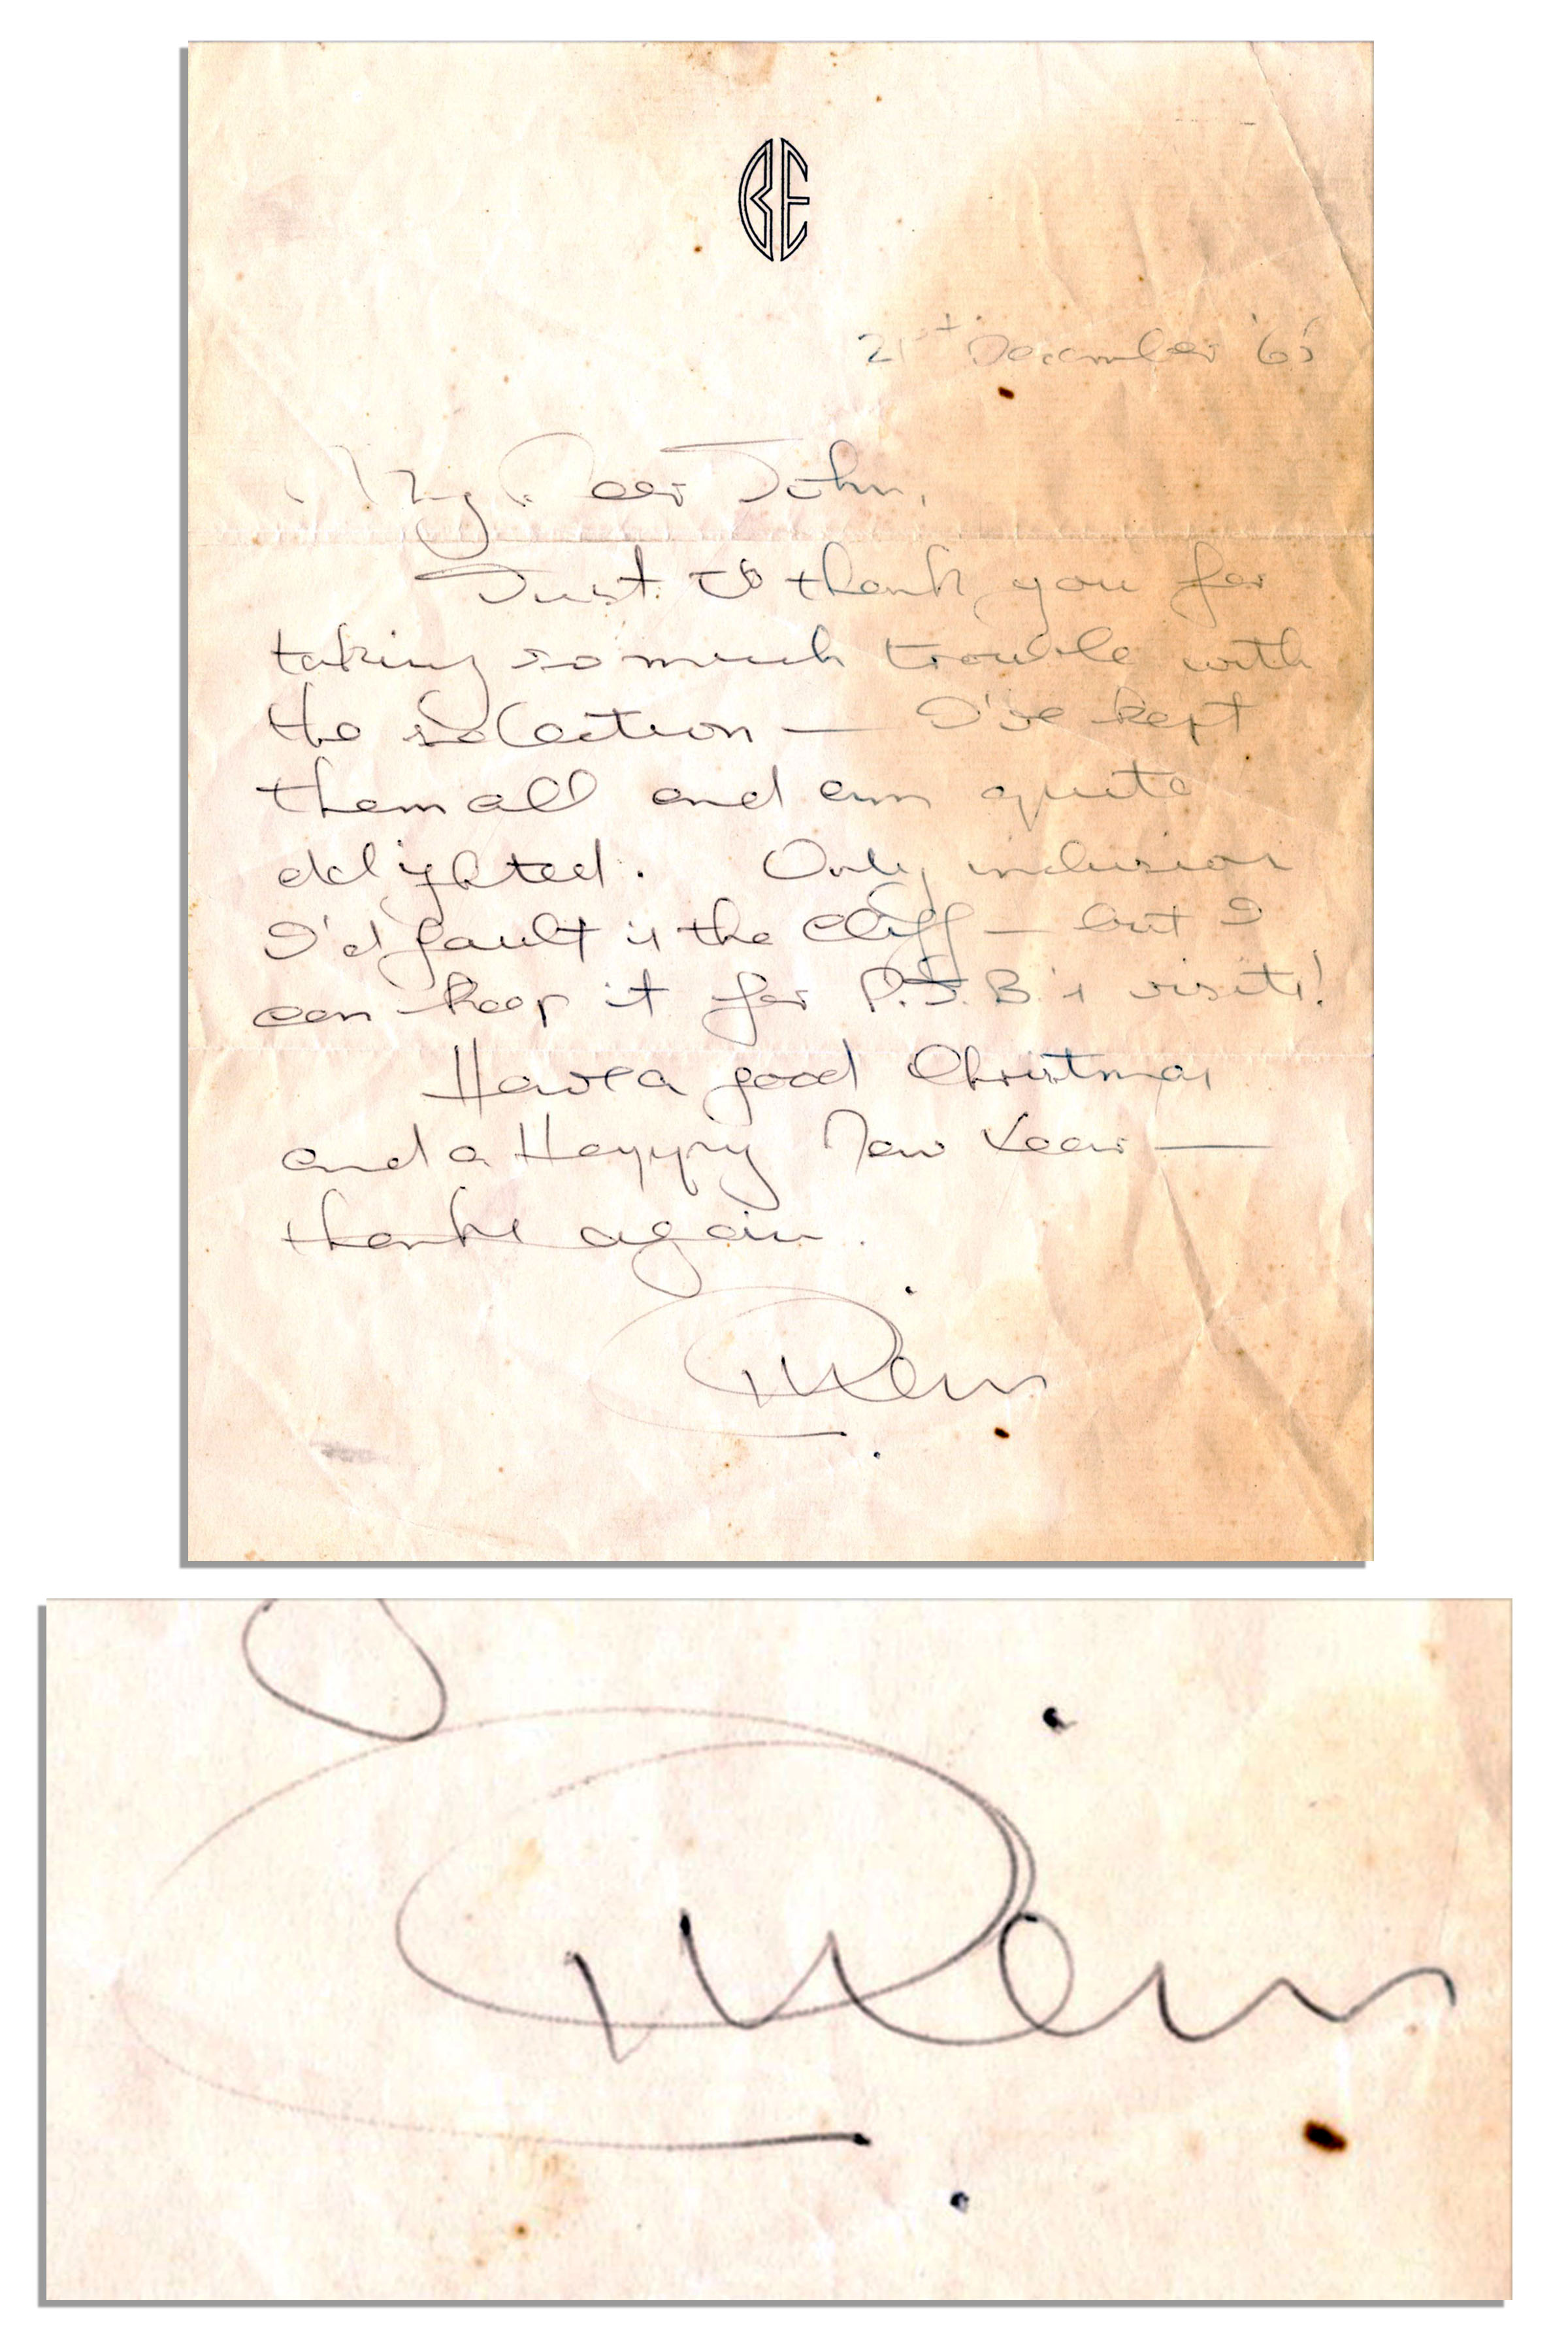 John Lennon Memorabilia Beatles Manager Brian Epstein Autograph Letter Signed to John Lennon -- ''...Just to thank you for taking so much trouble with the selection...'' -- 1965